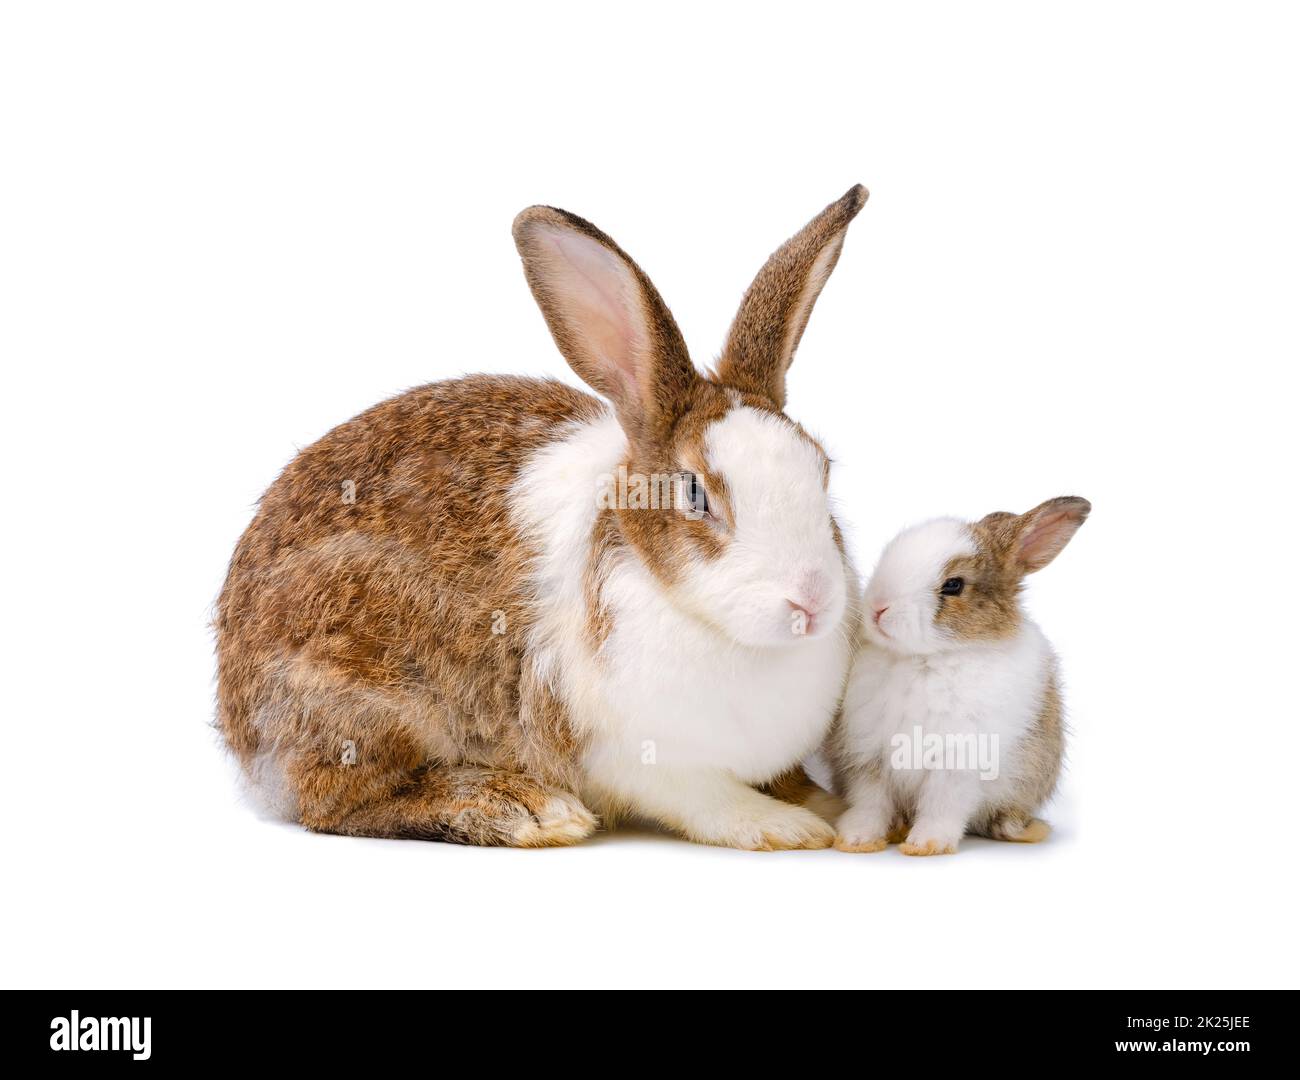 Adorable mother rabbit and baby rabbit on white background. Stock Photo